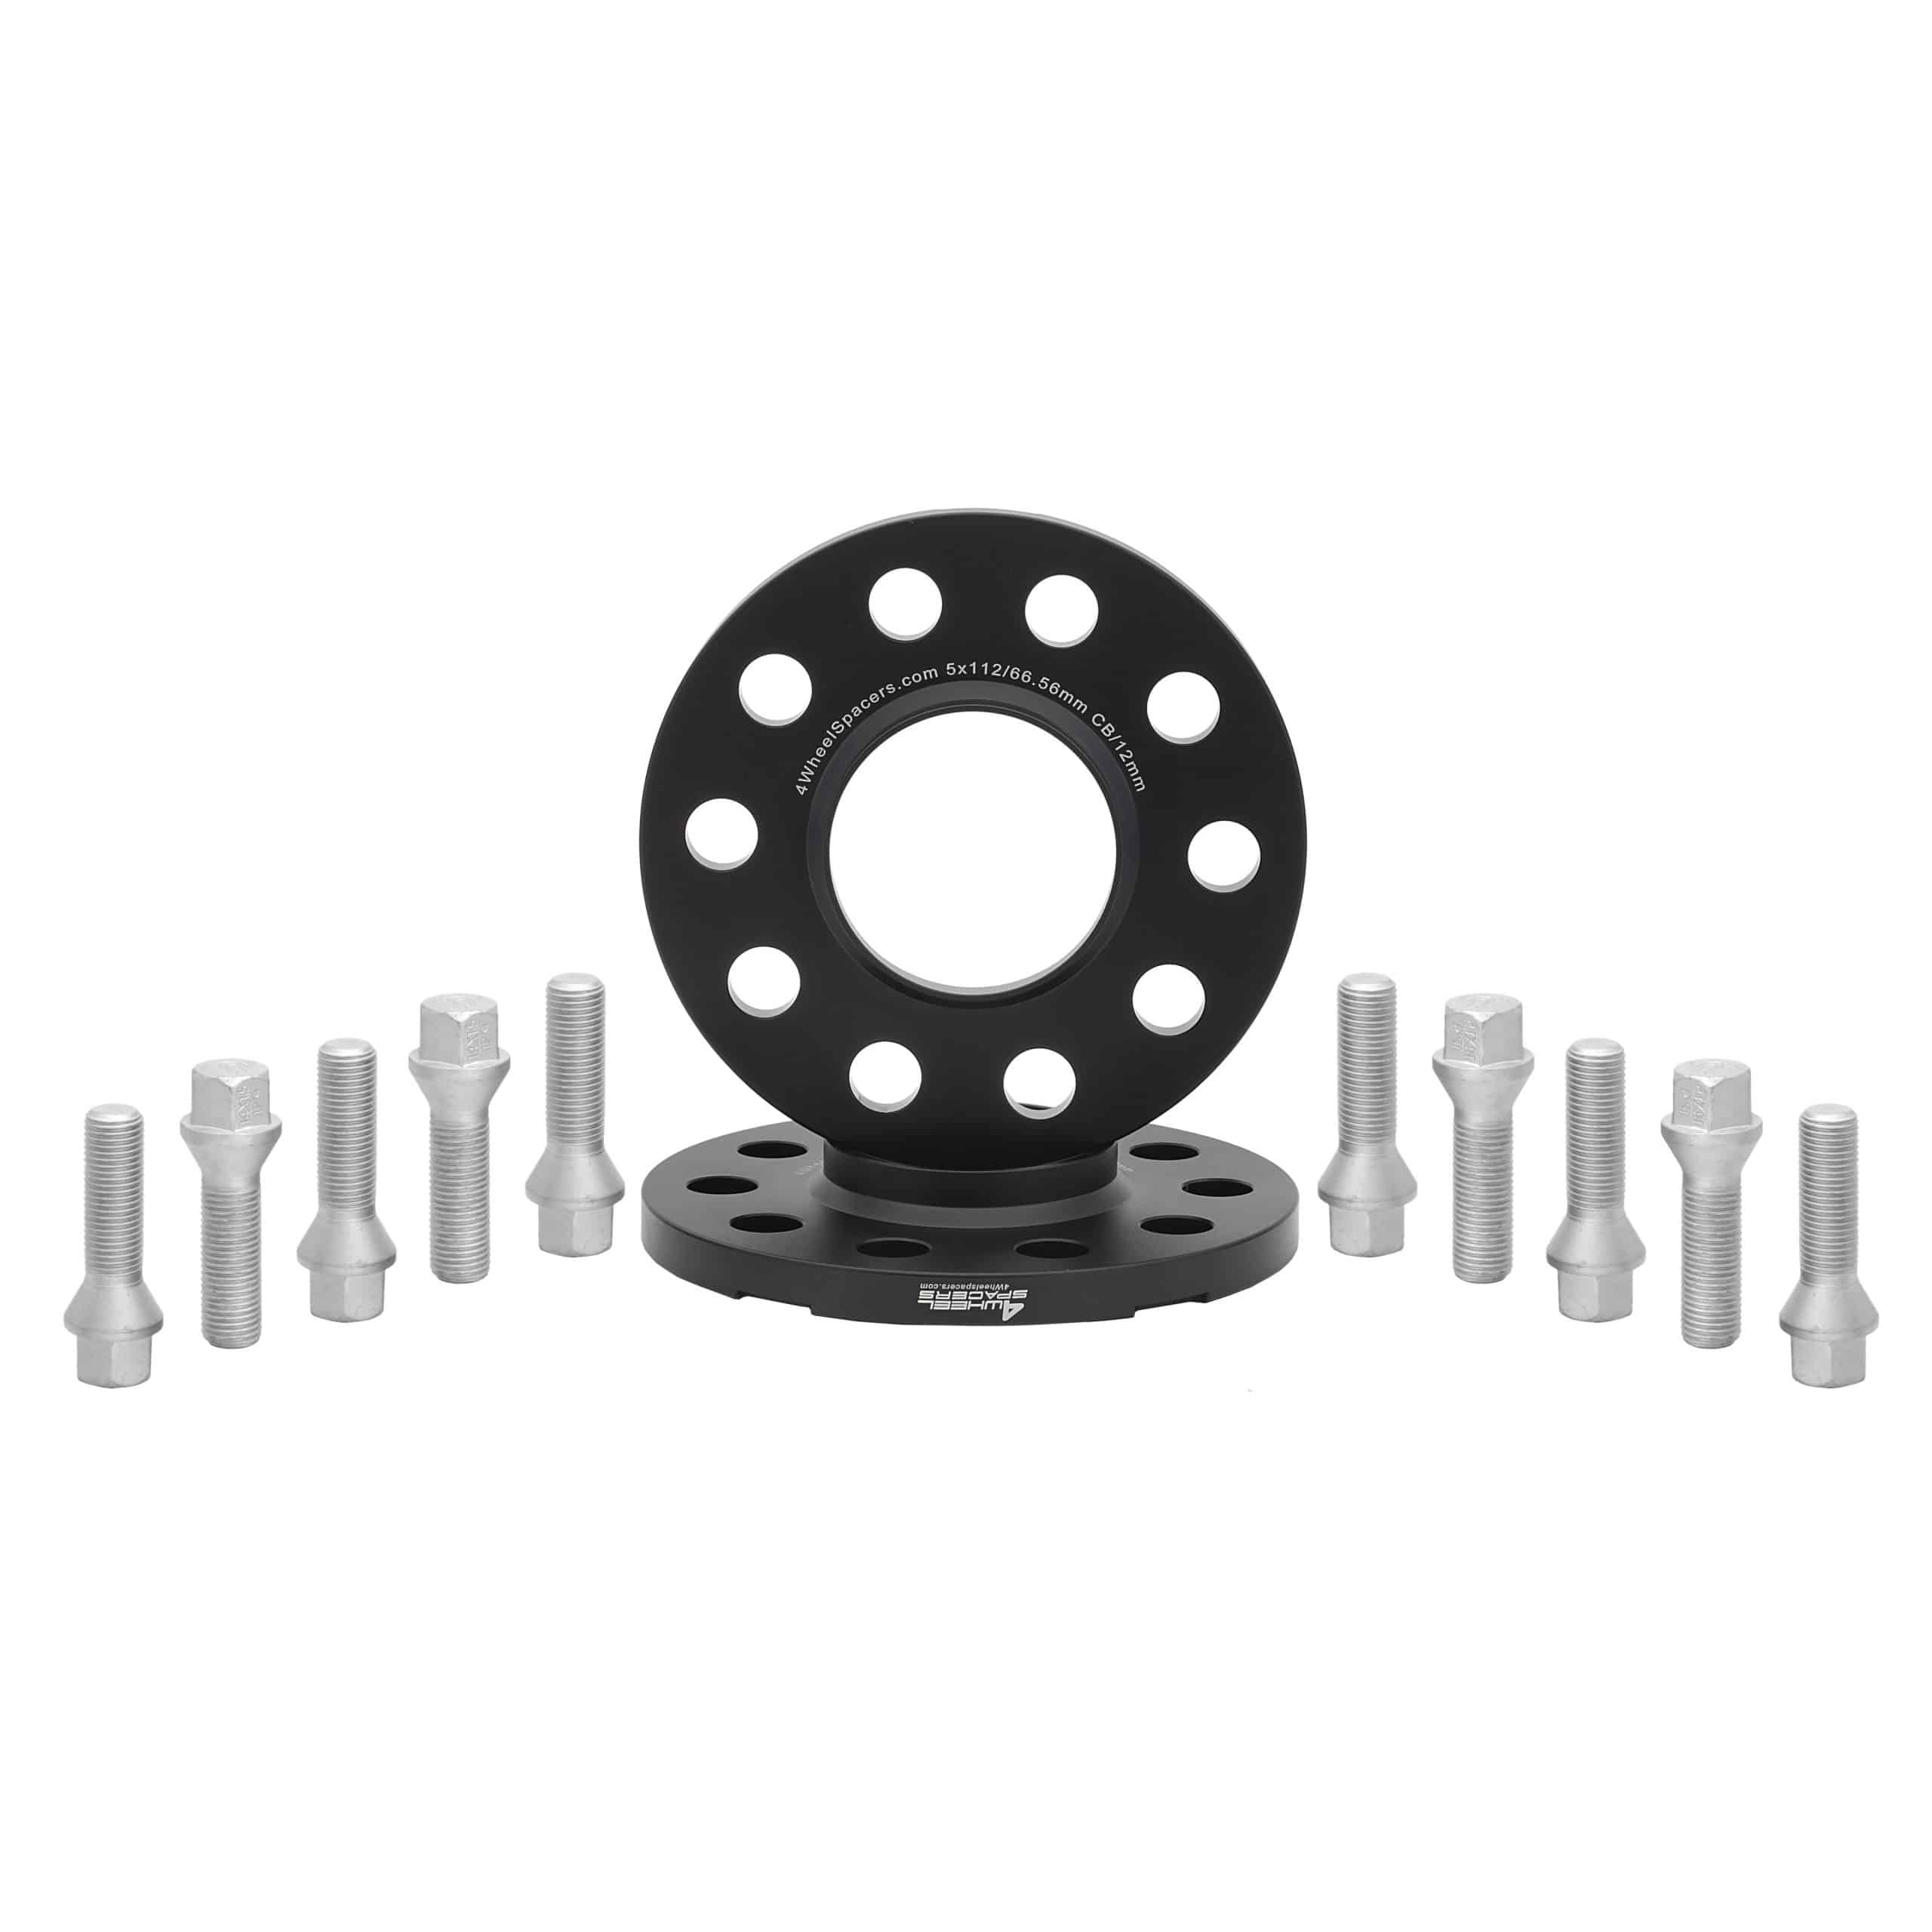 Volkswagen 12mm Hub-Centric Wheel Spacers With Conical Seat Bolt Kit